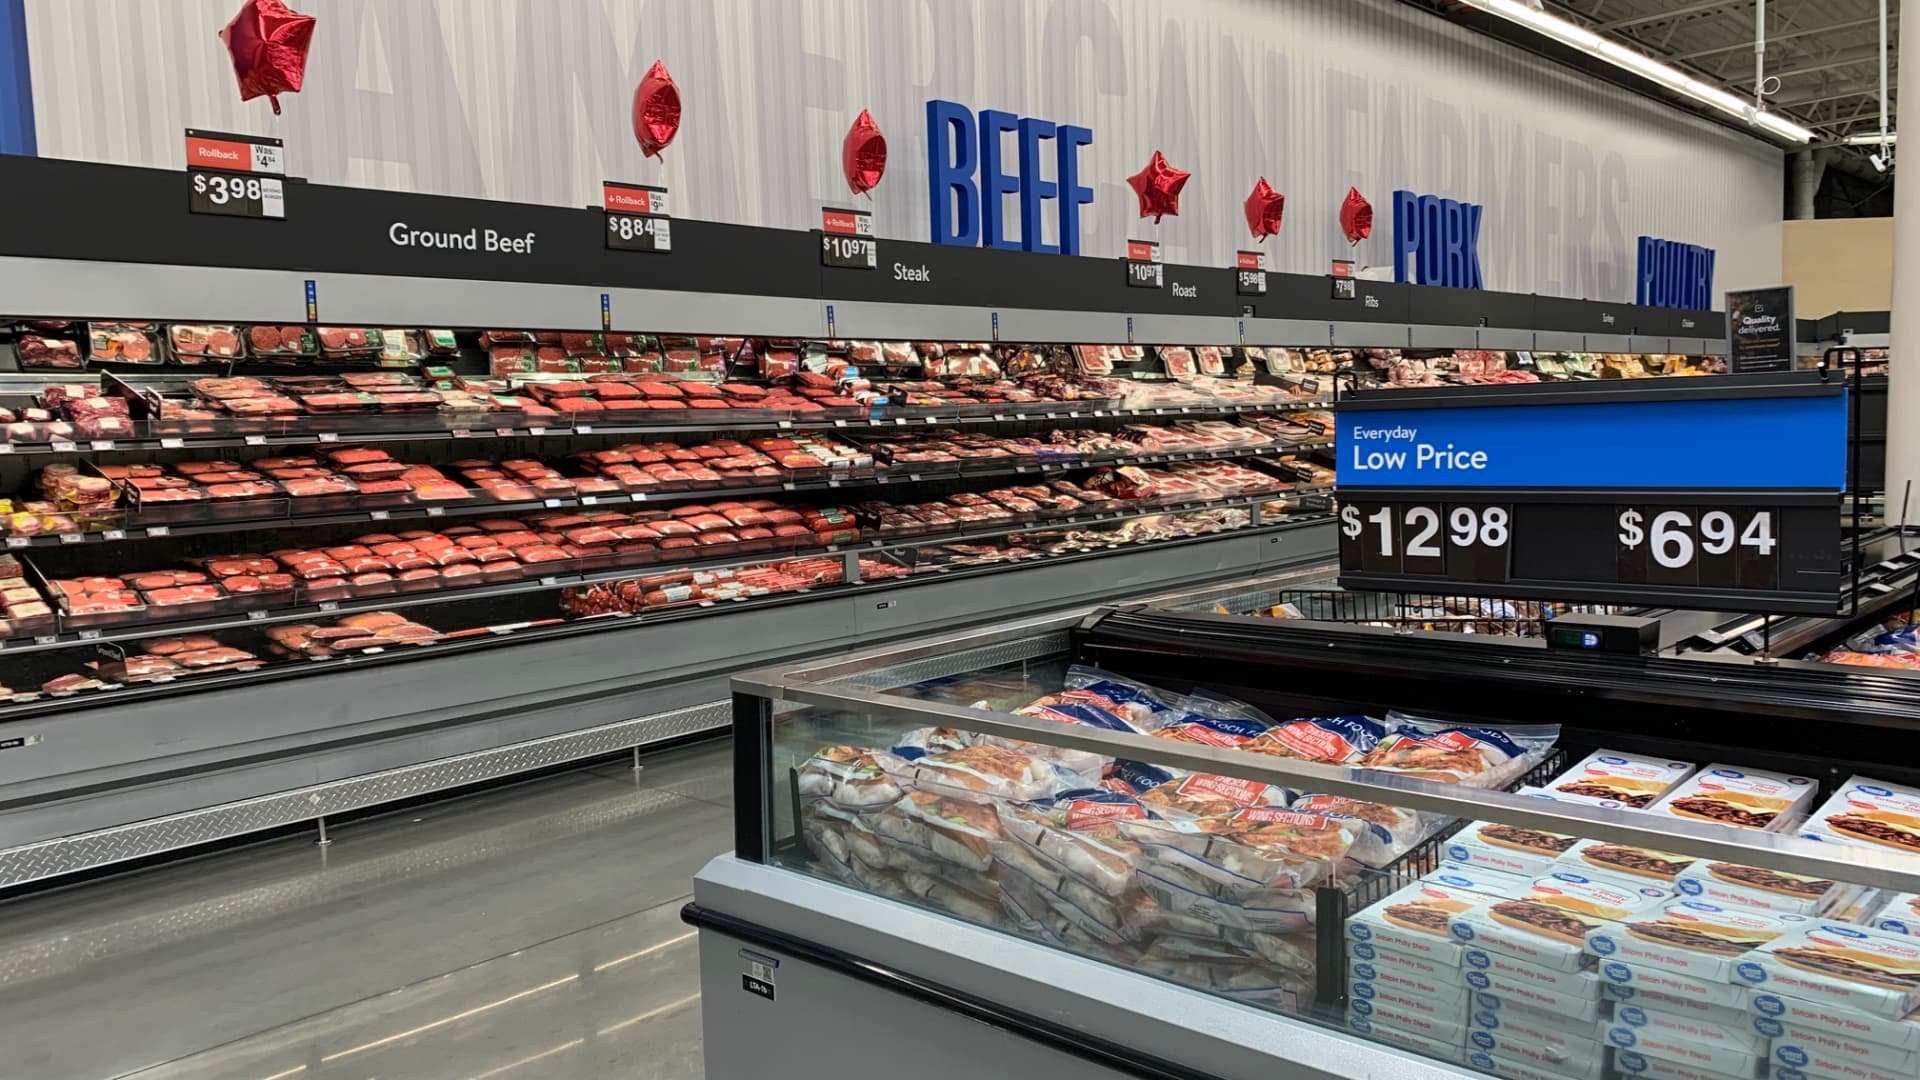 Walmart invests in ranchers' company as more shoppers opt for premium beef - CNBC